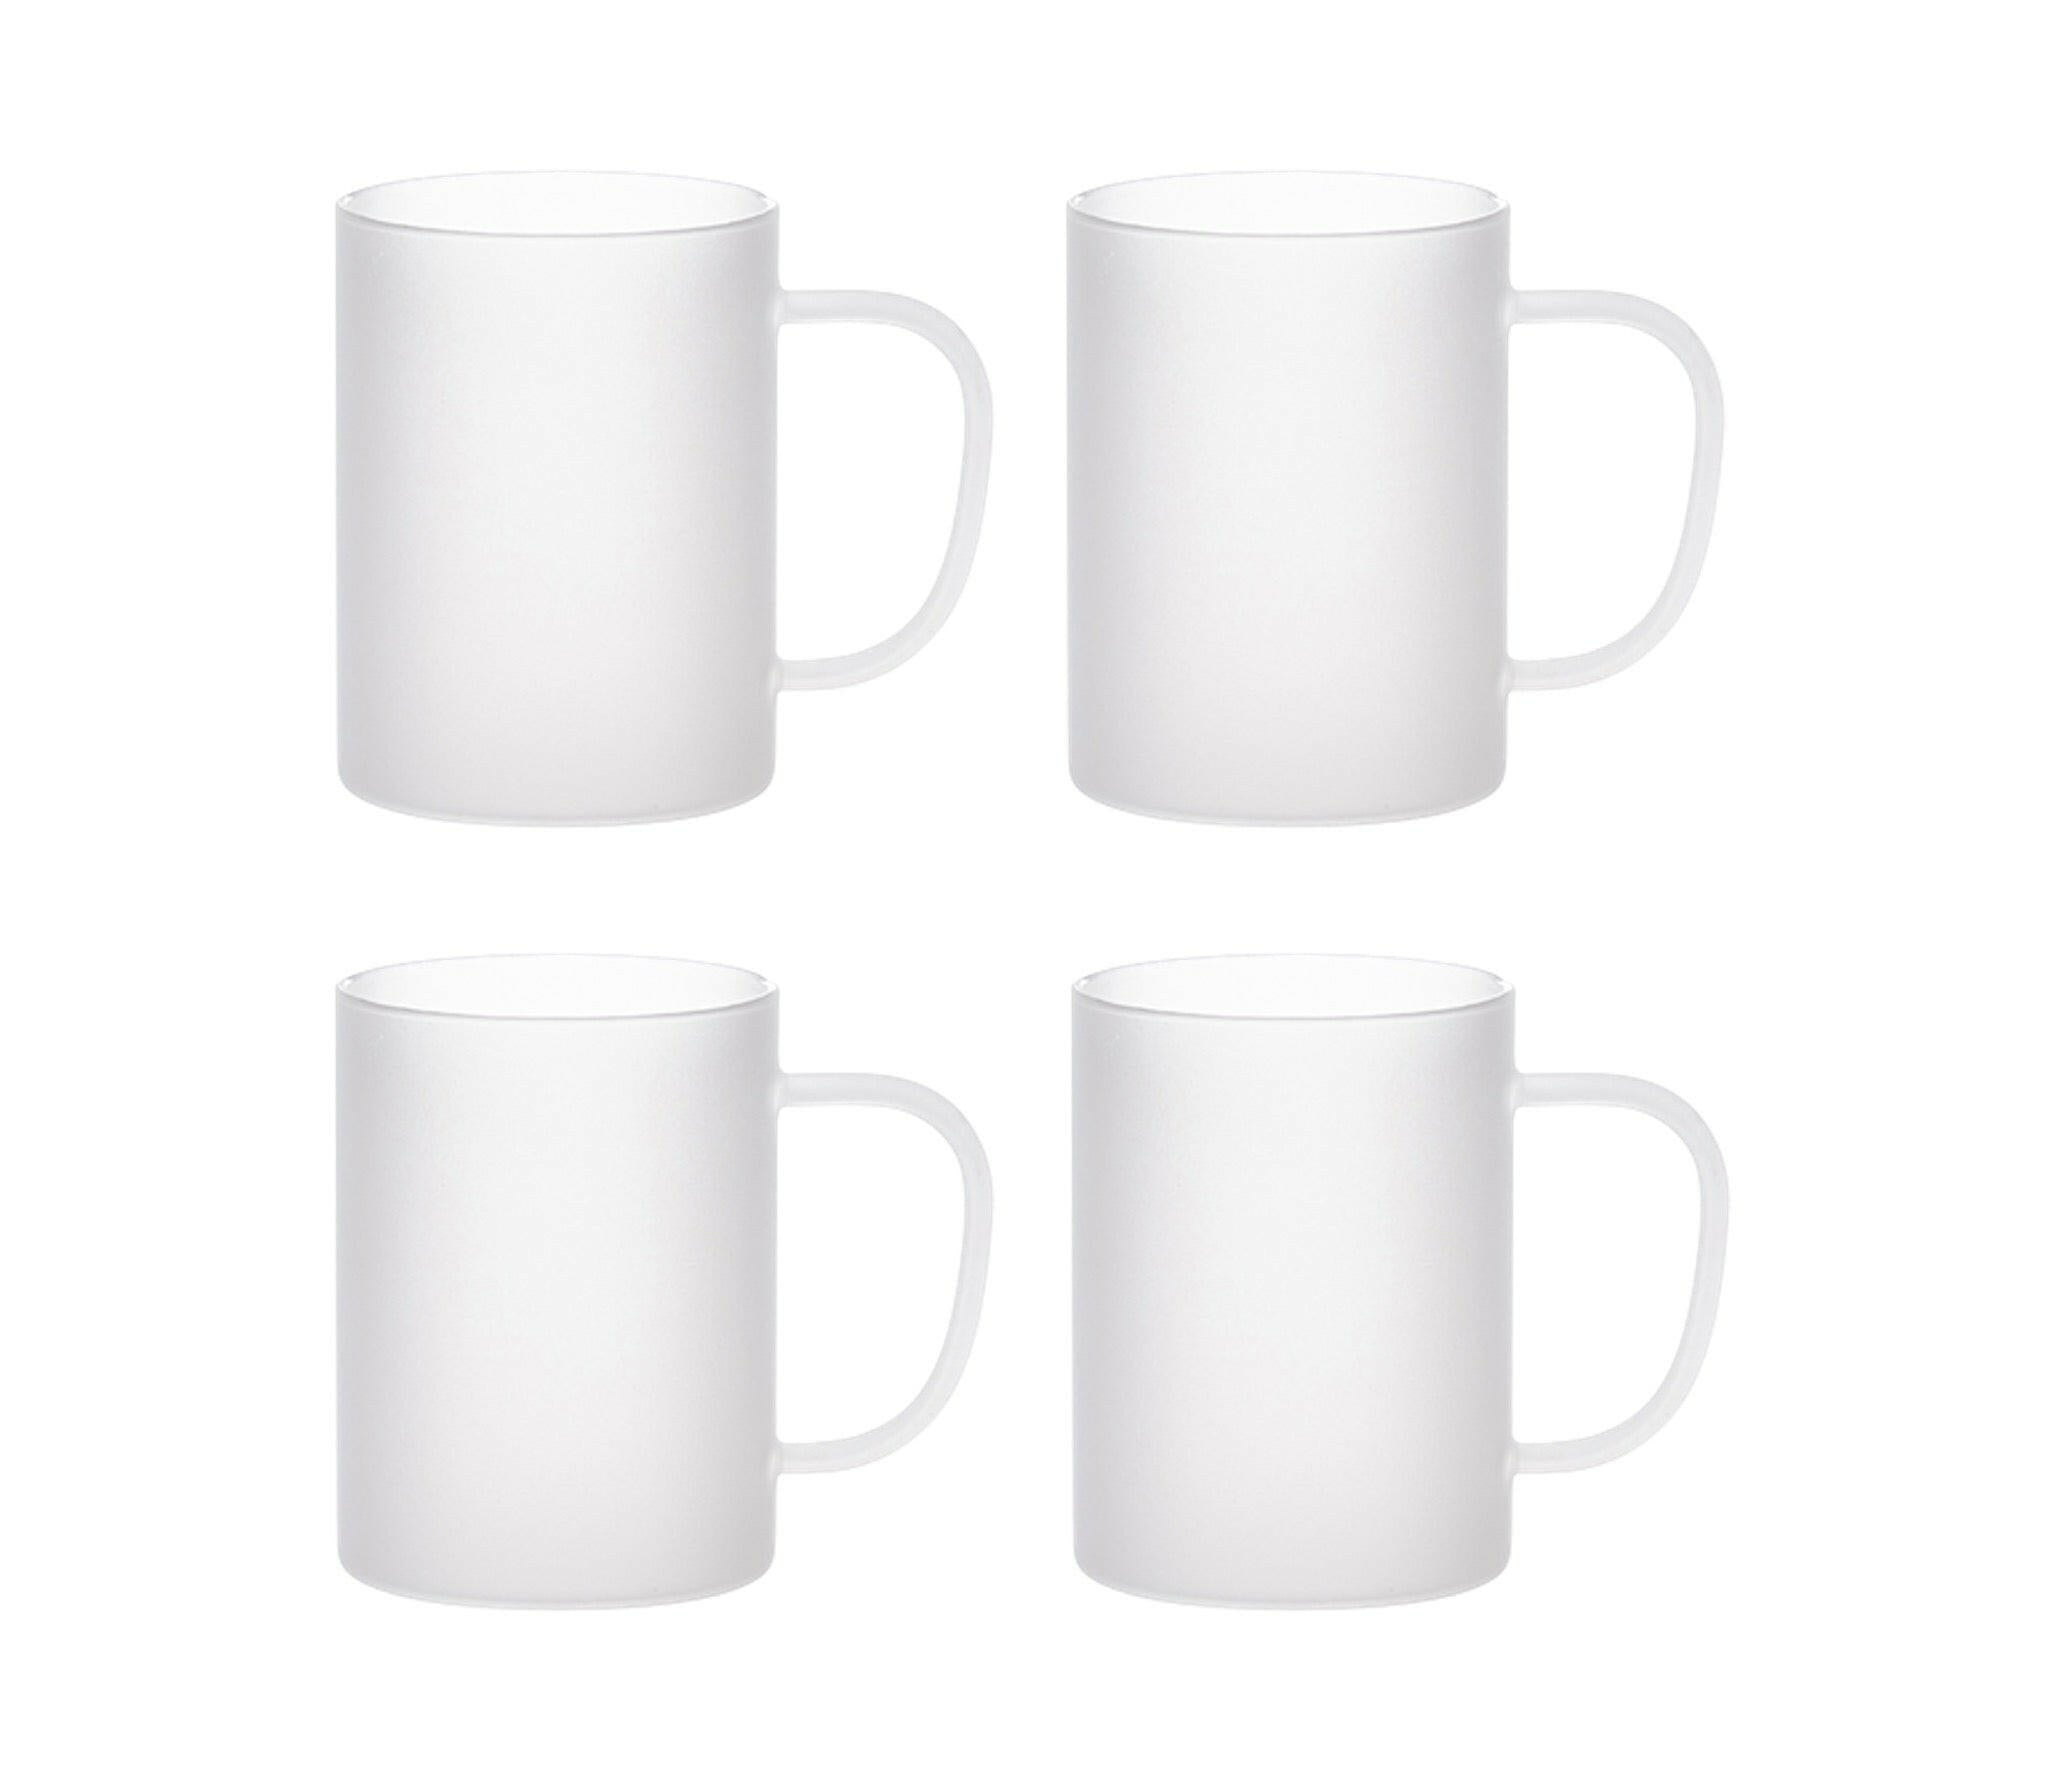 15oz Frosted Glass Sublimation Mugs - 4 Pack.